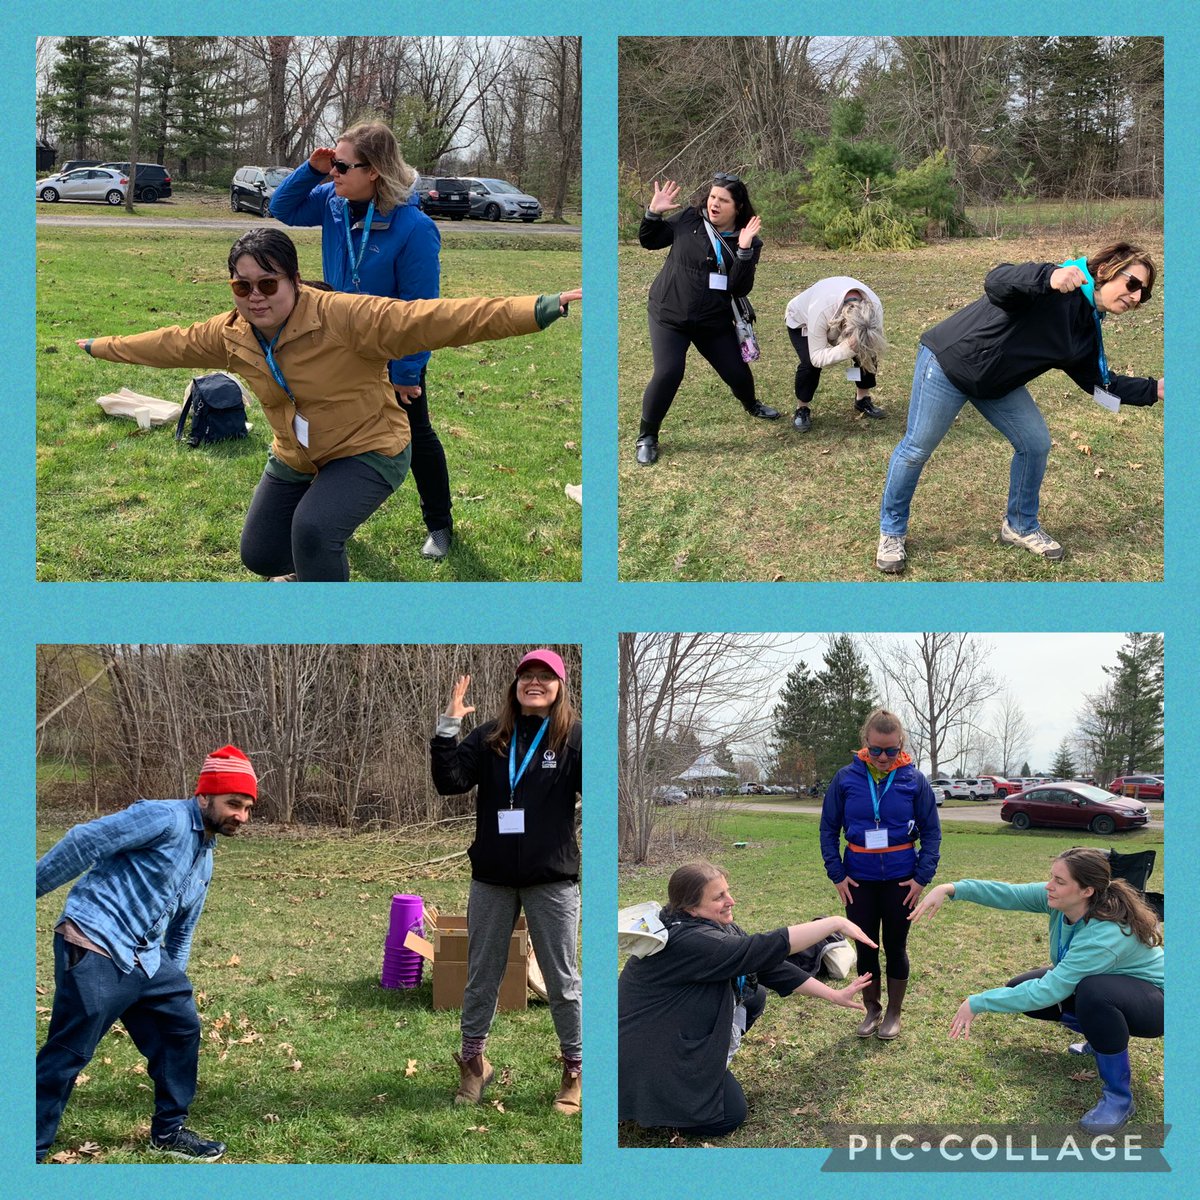 Incredible event 4 sharing ideas at #ocsbOutdoors learning conference Such fun facilitating tableau & soundscape activities. So much artistic potential 4 the outdoor learning initiative ⁦⁦@YKrawiecki⁩ ⁦@NedaBernabo⁩ ⁦@jengauthier9⁩ #ocsbEARTH ⁦@ocsbEco⁩